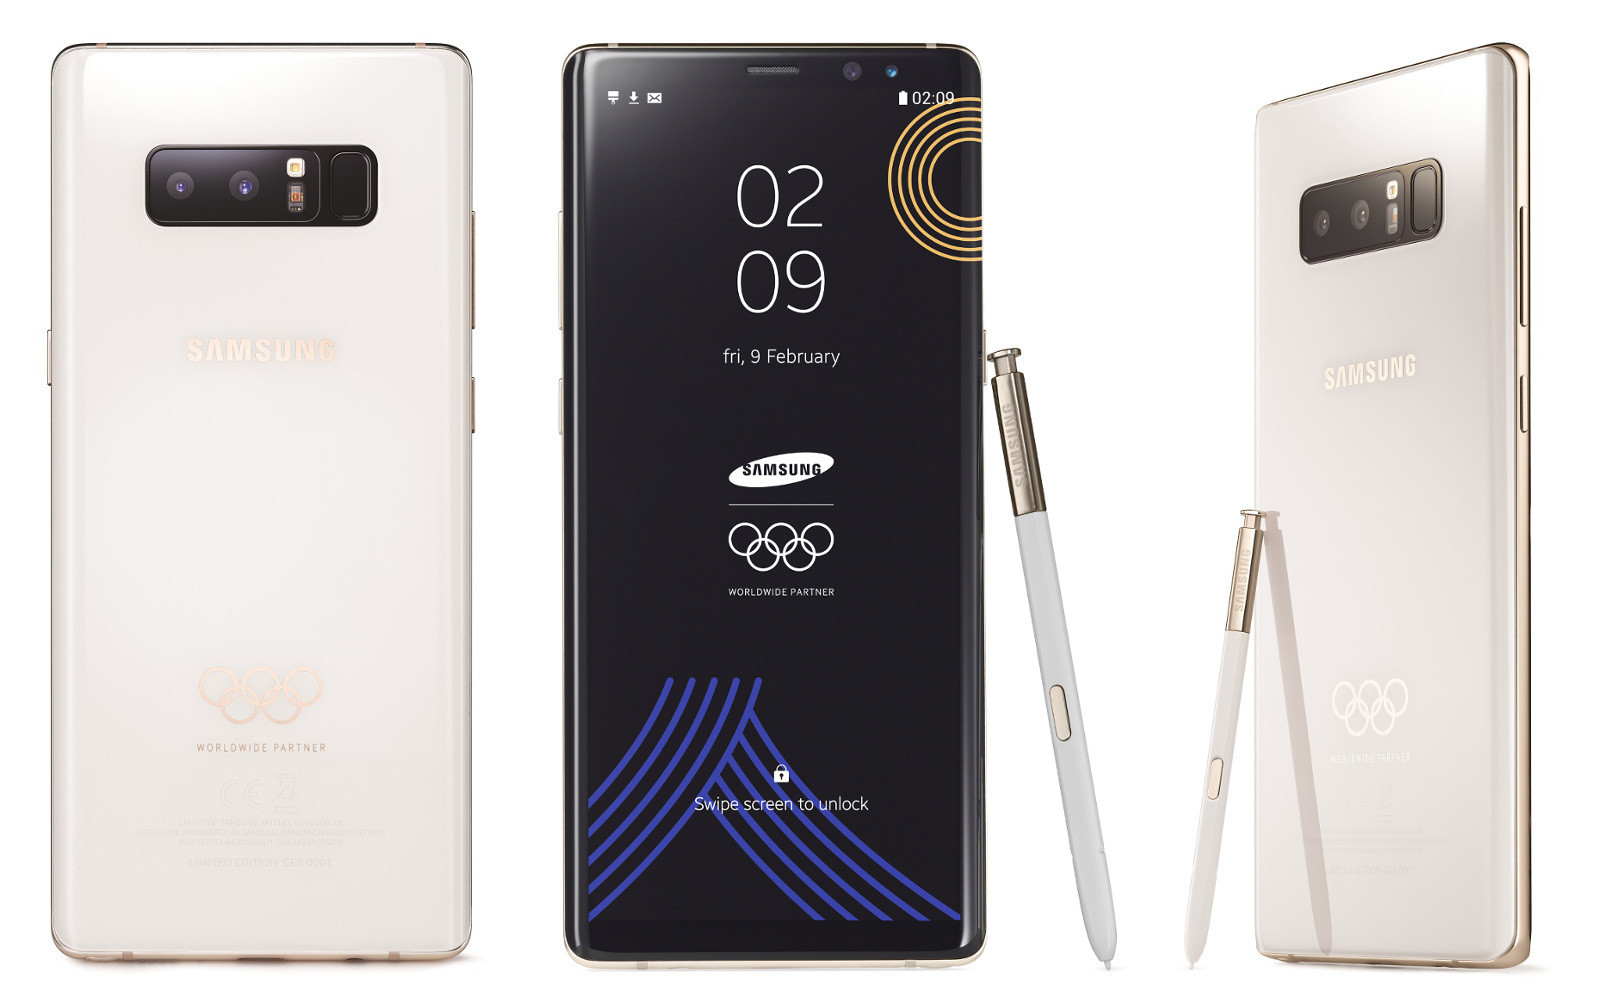 The Pyeongchang 2018 limited edition Samsung Galaxy Note8 will include a number of exclusive features ©Samsung